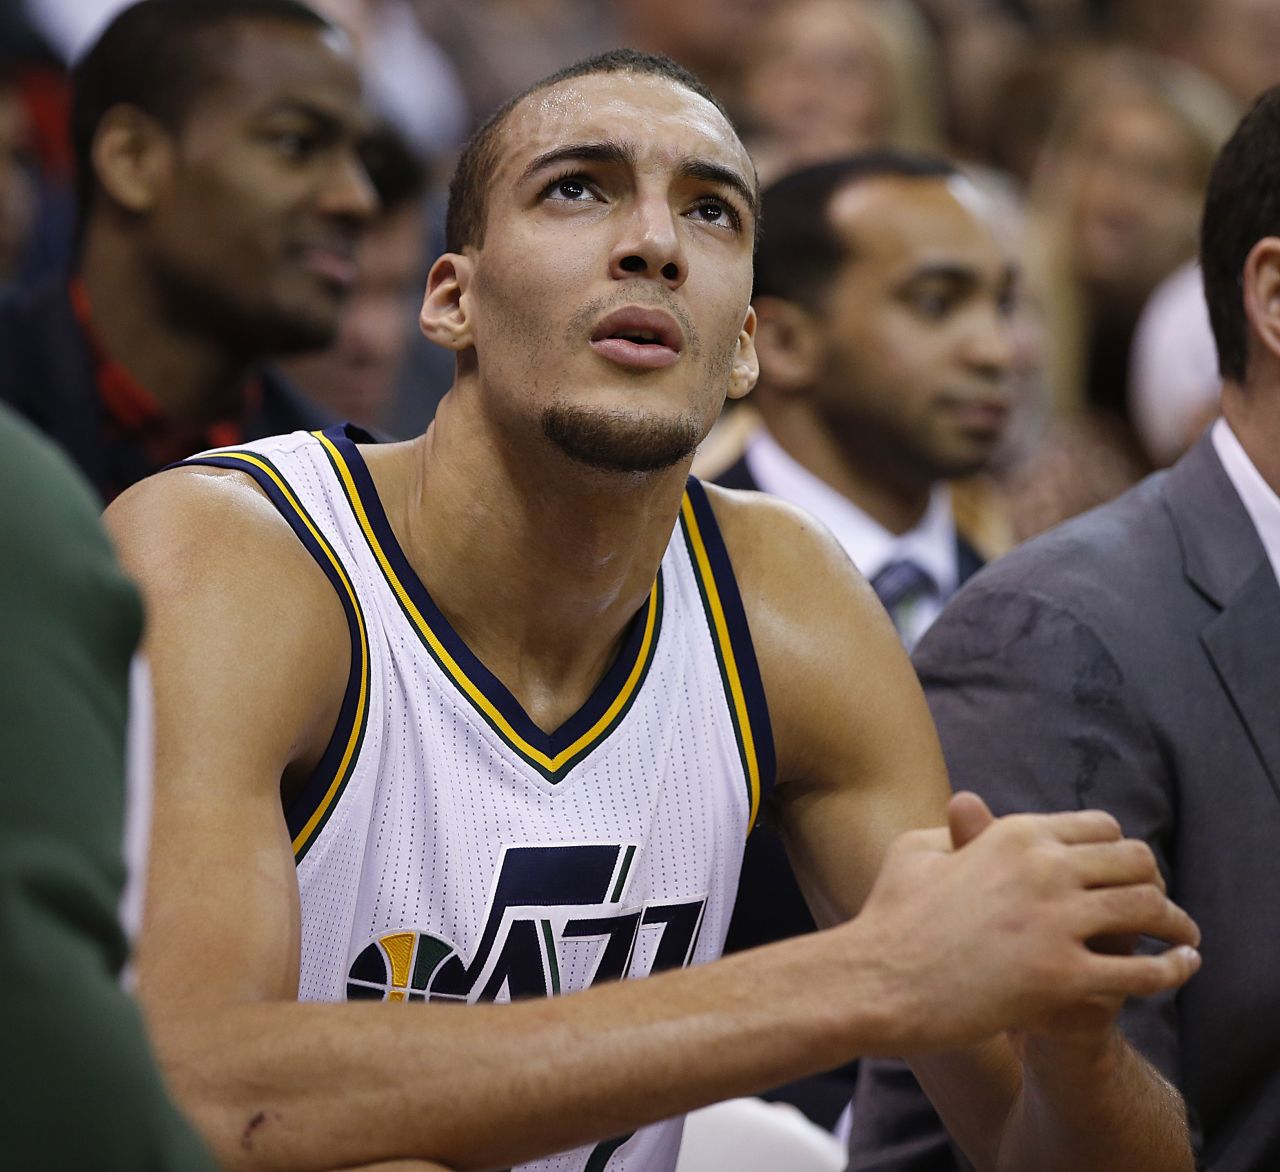 Heading into the new NBA season, France accounts for the most players in the competition apart from the U.S. and Canada. Utah Jazz center Rudy Gobert, like Parker, is a star. 